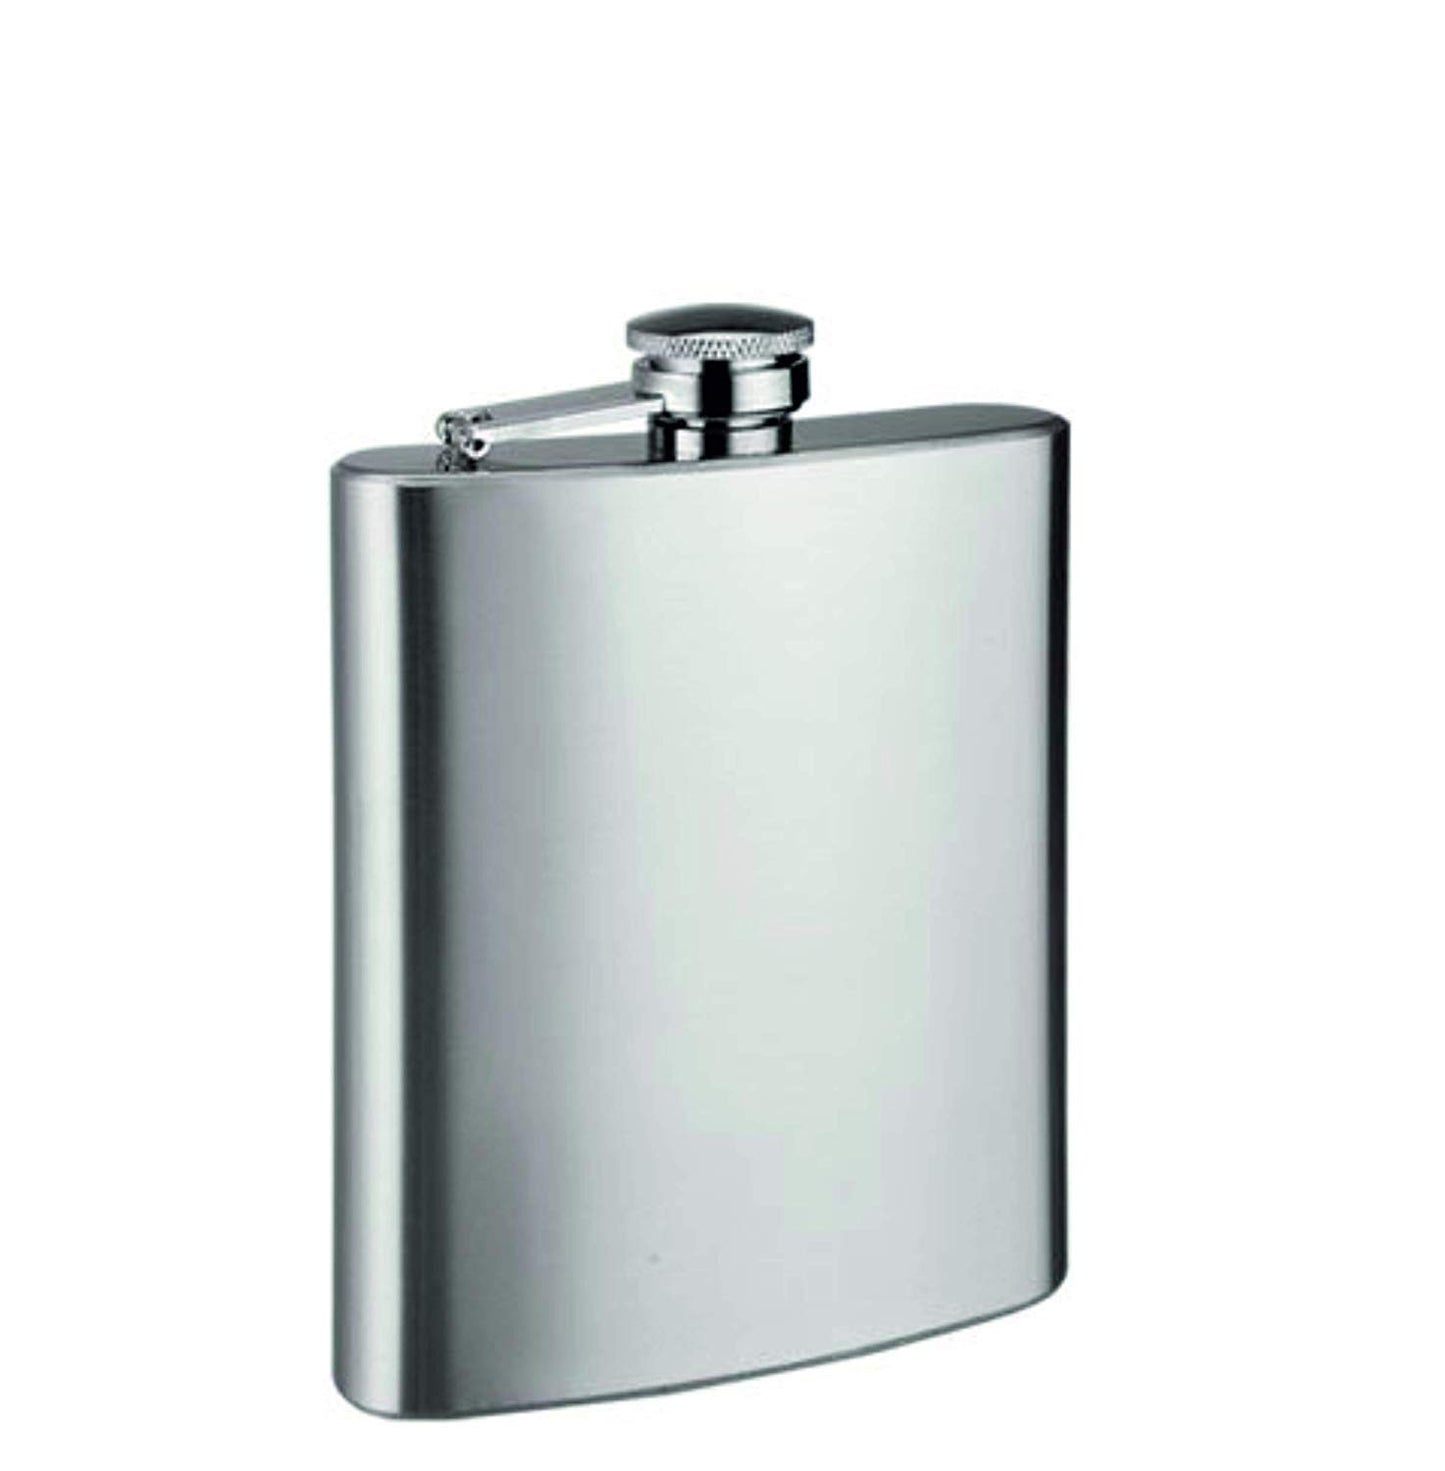 Rudra Exports 7 oz (210 ml) Stainless Steel Hip Flask Portable Alcoholic Beverage Holder for Wine Vodka Whisky (Plain)